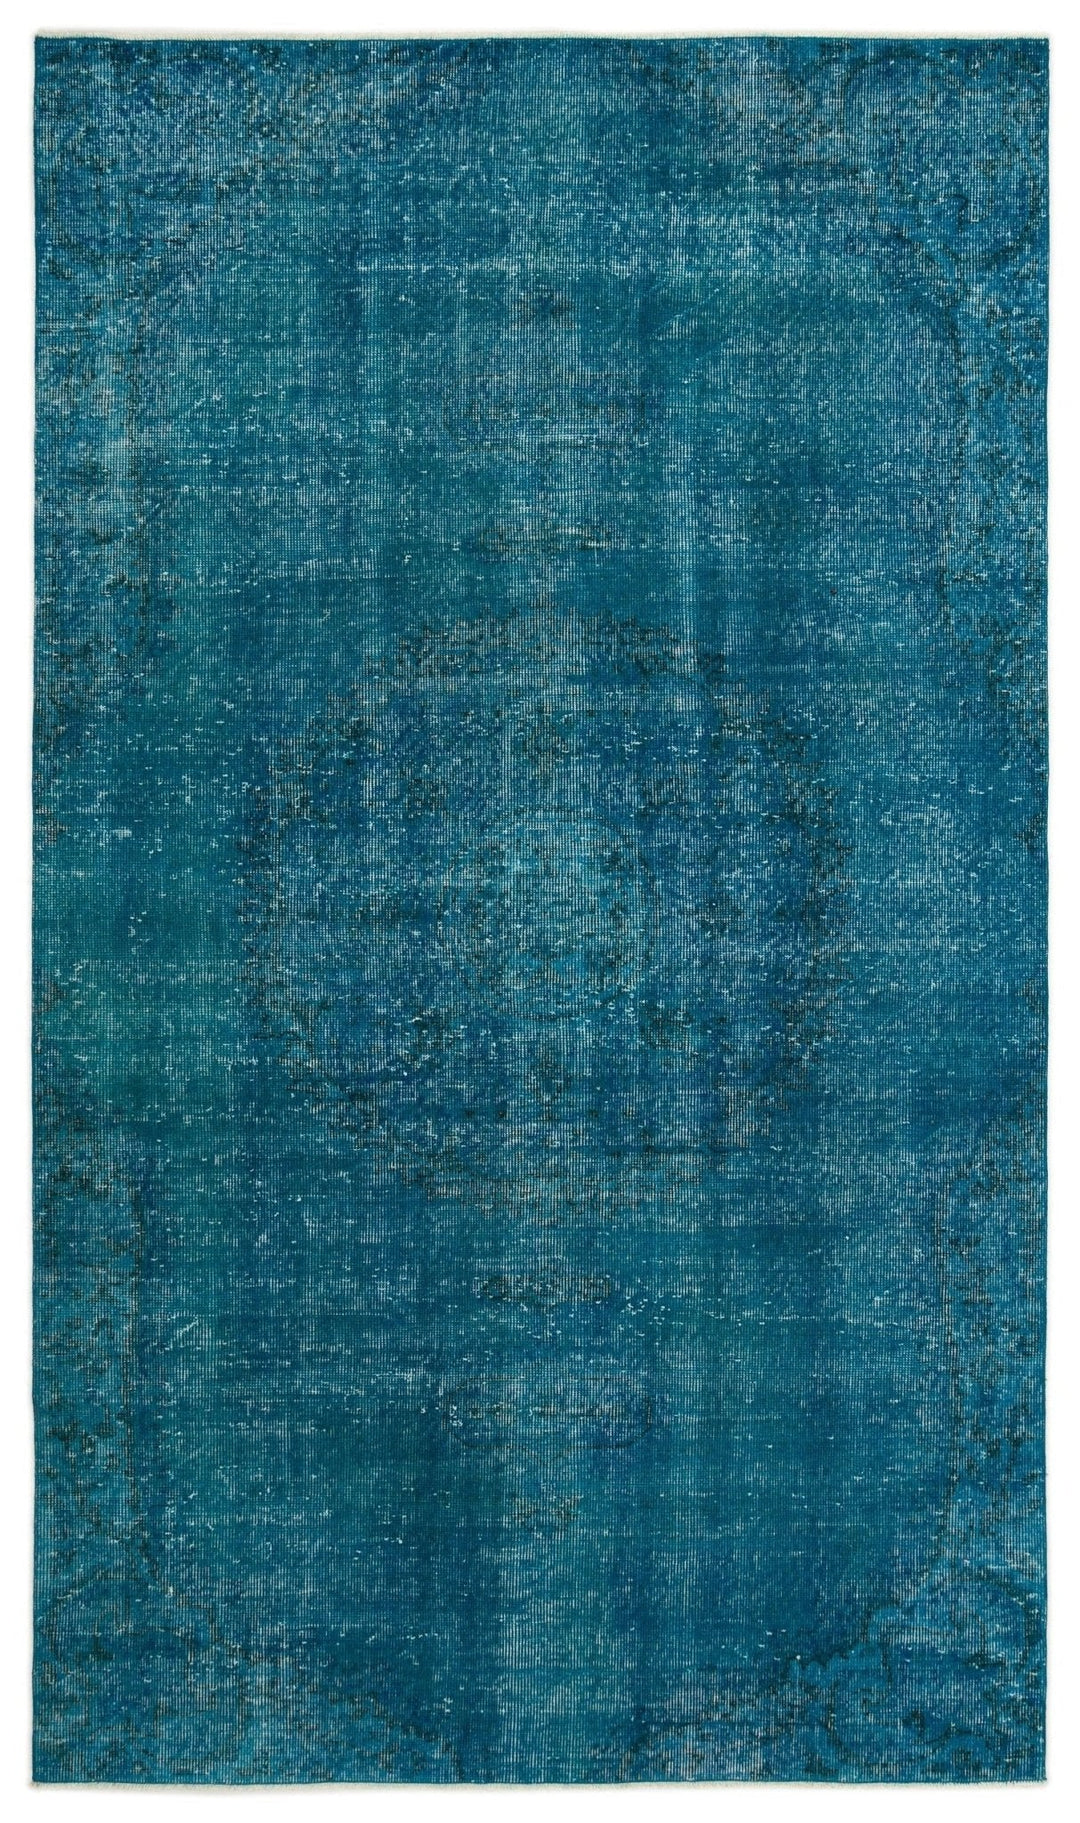 Athens 18992 Turquoise Tumbled Wool Hand Woven Carpet 154 x 261